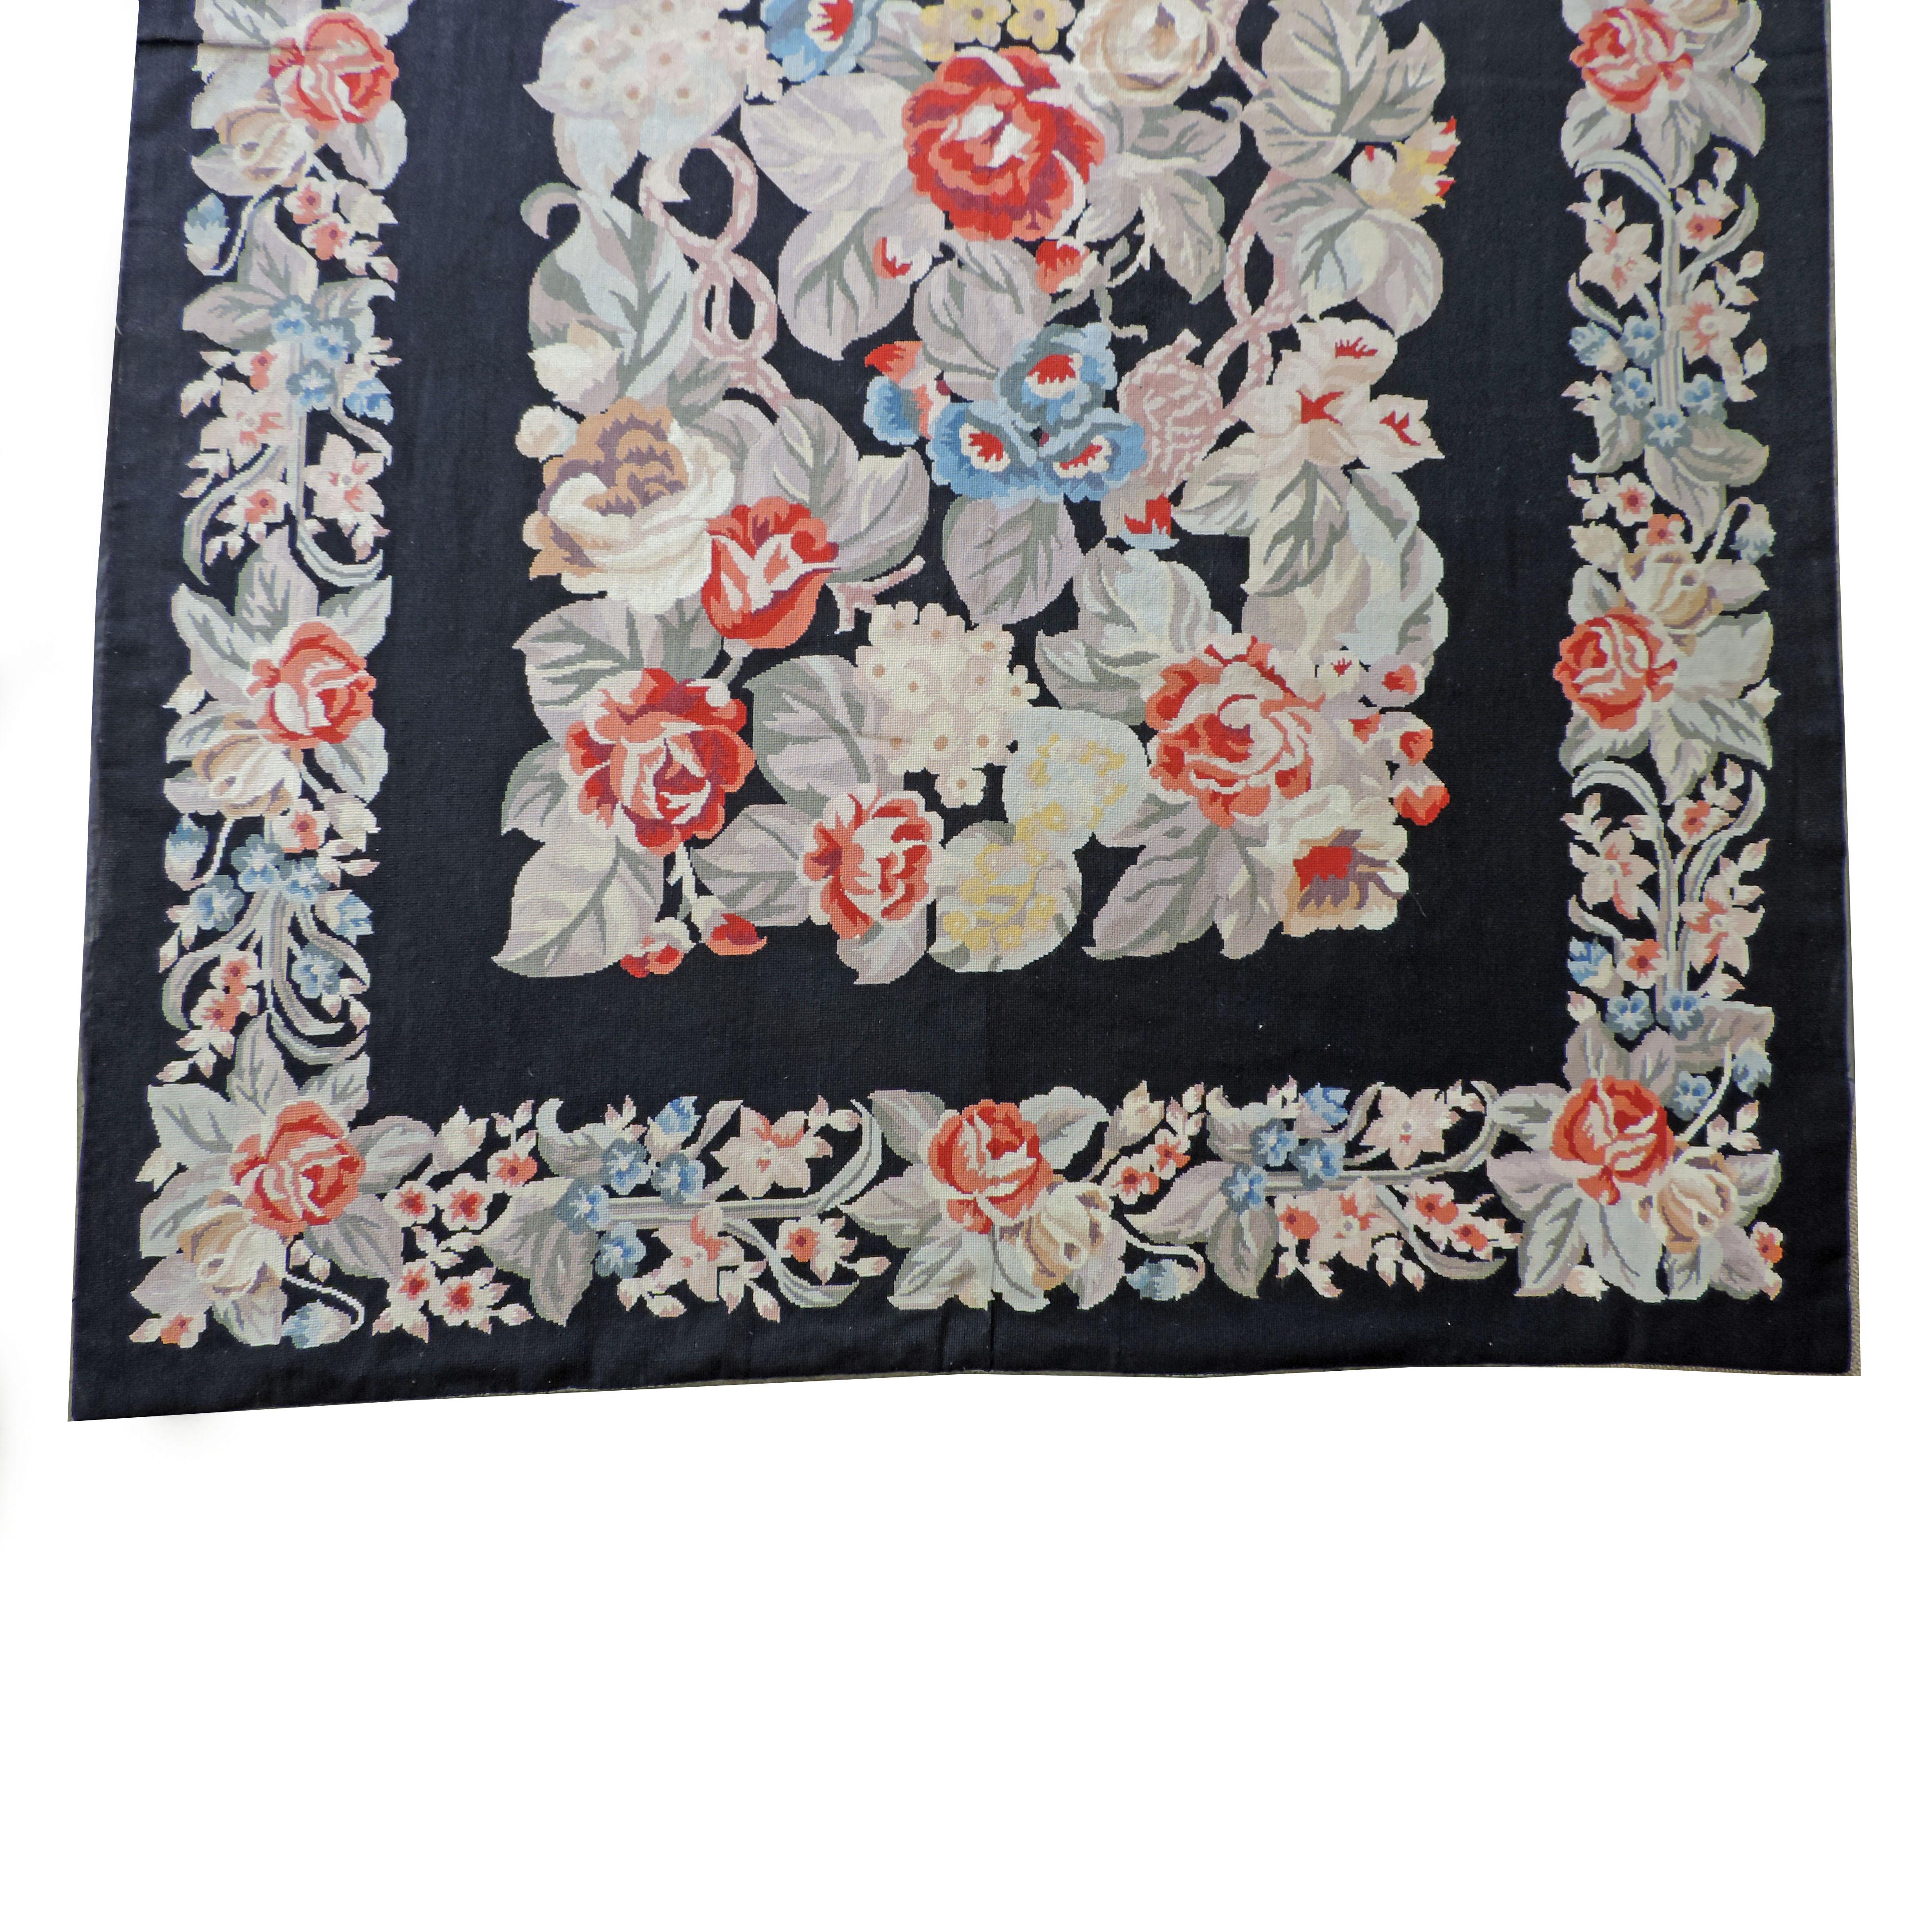 Wool Flowers and Roses Aubusson Tapestry/Carpet, Europe, 1930s For Sale